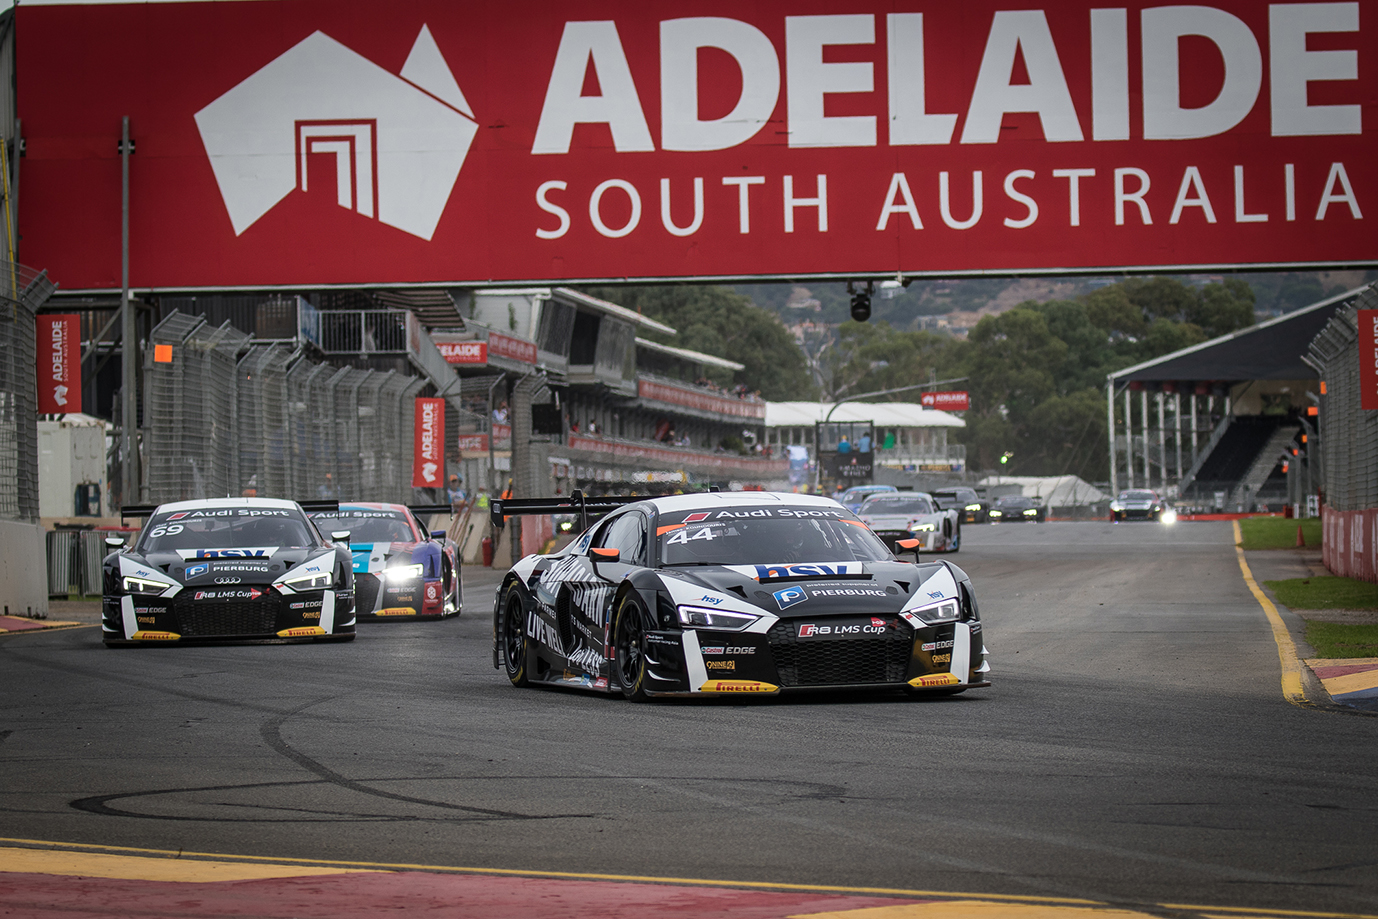 Strong weekend for hsy Racing in Adelaide